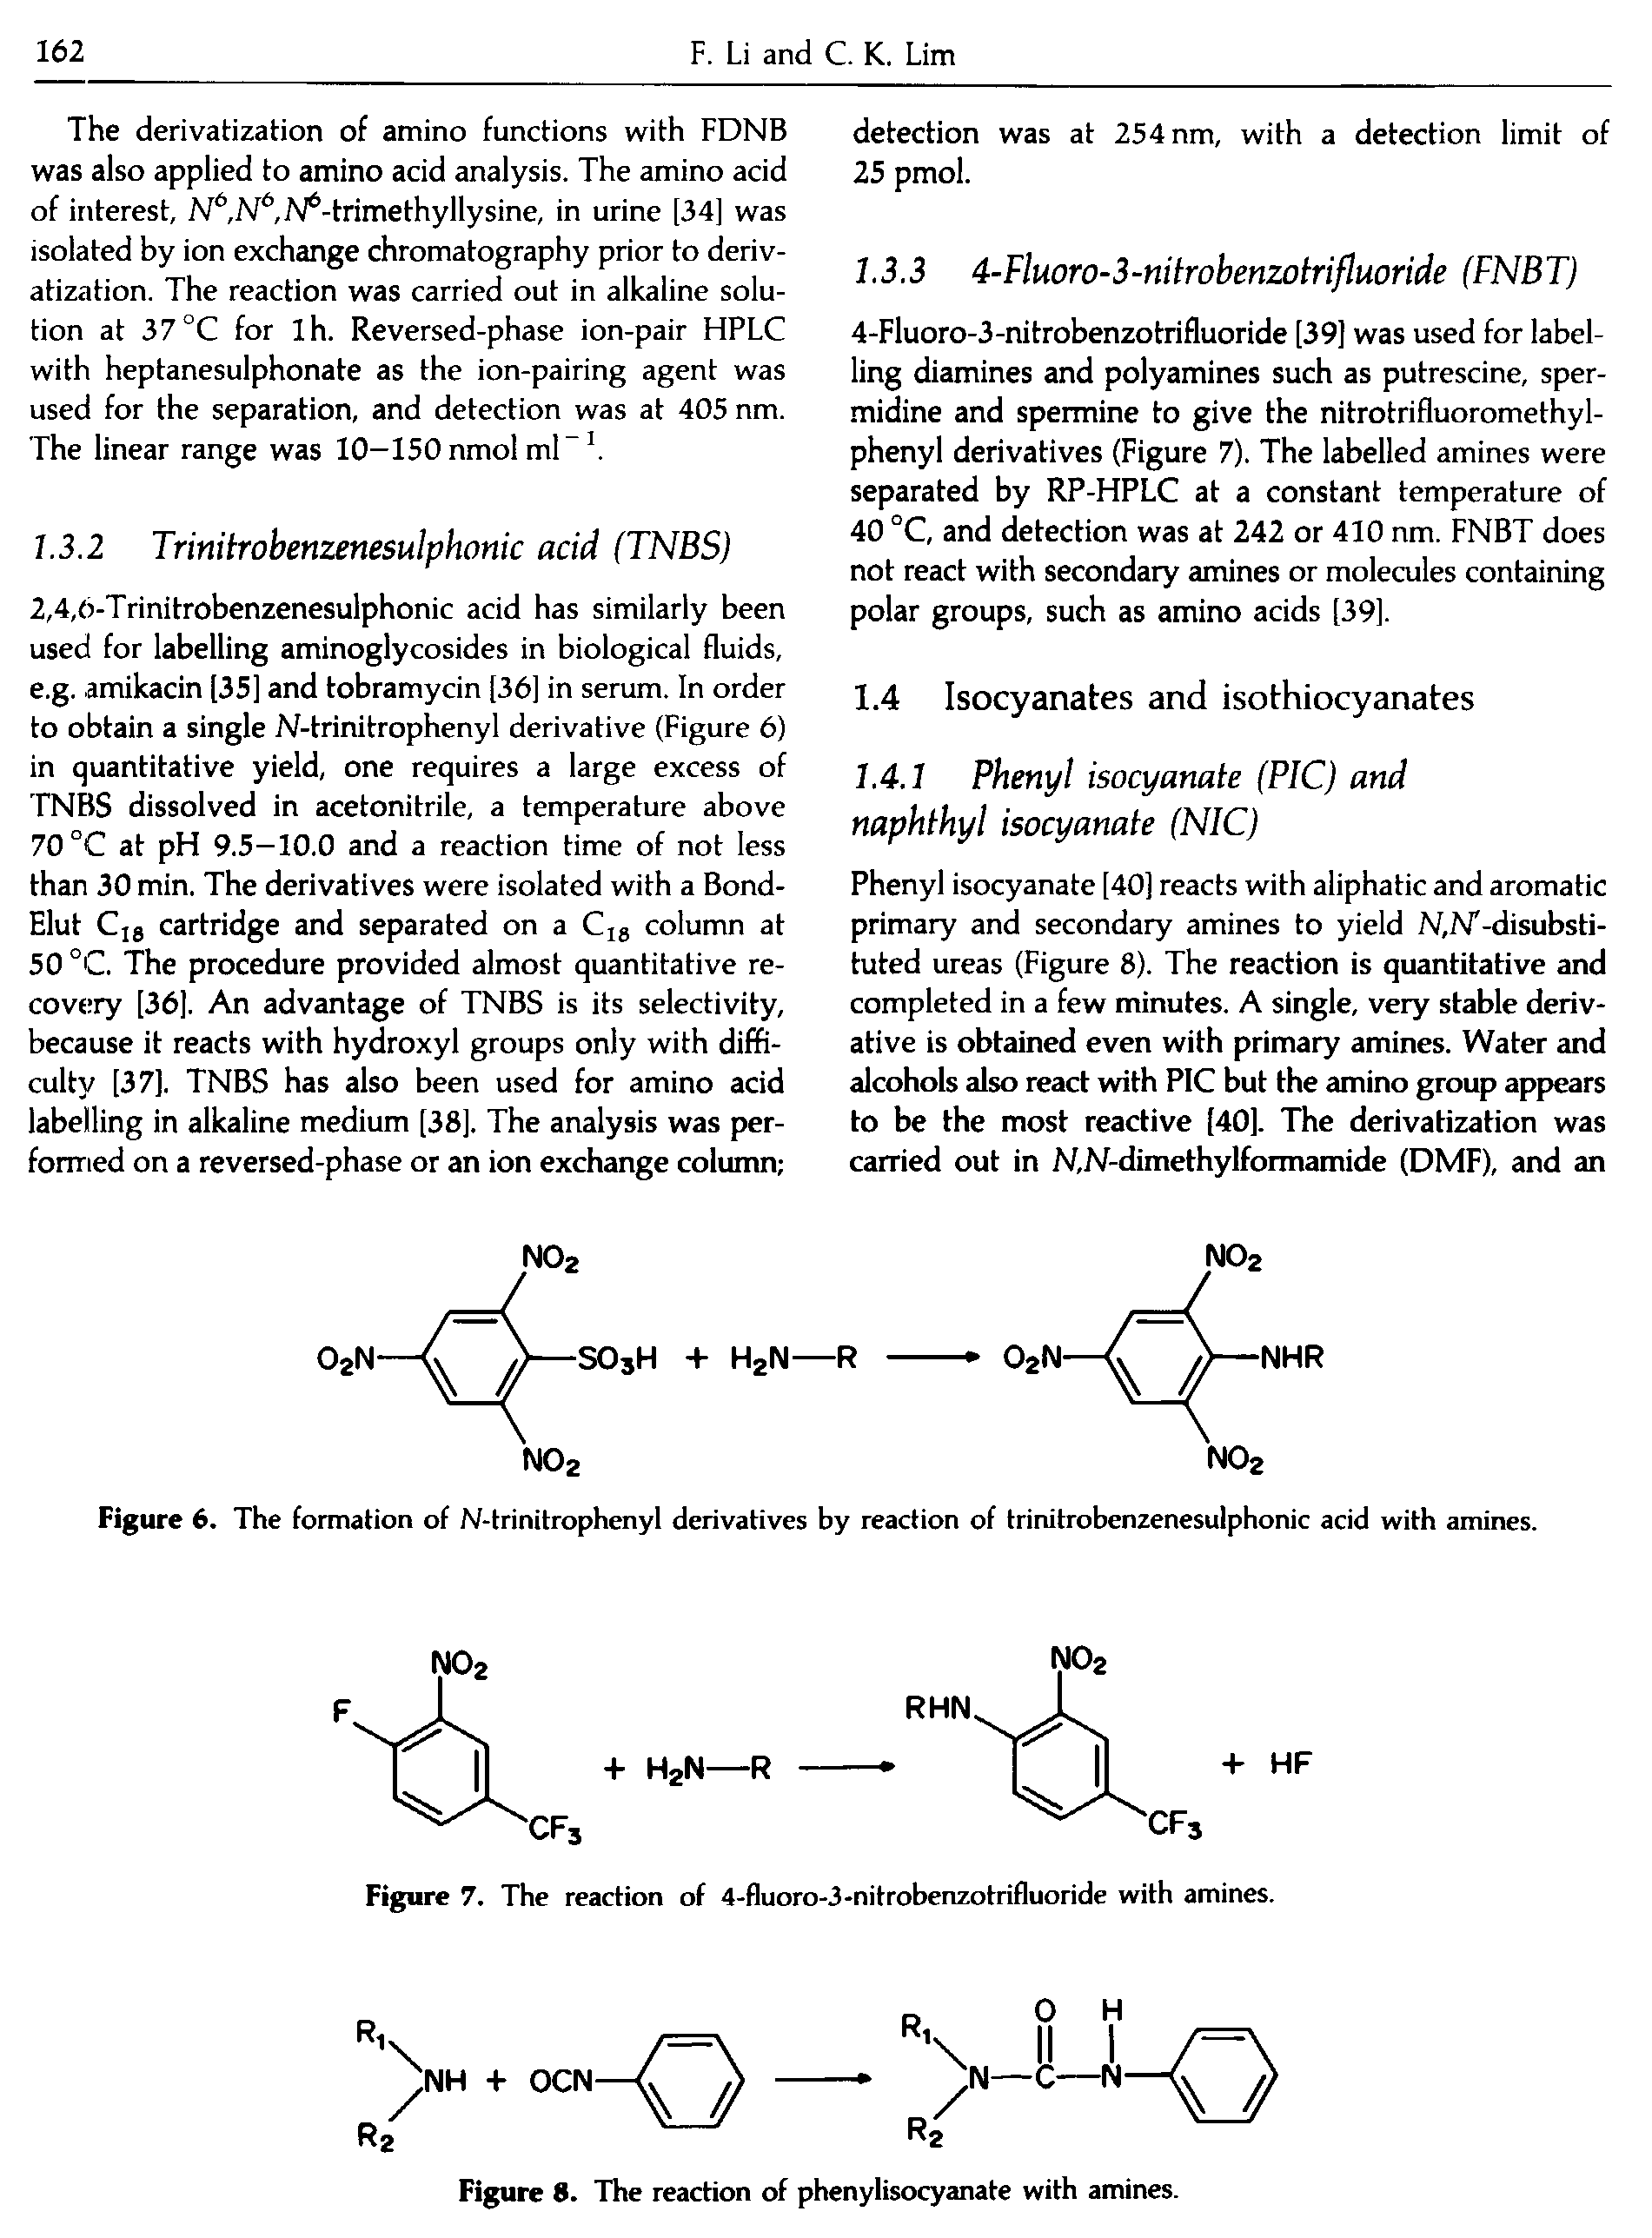 Figure 6. The formation of N-trinitrophenyl derivatives by reaction of trinitrobenzenesulphonic acid with amines.